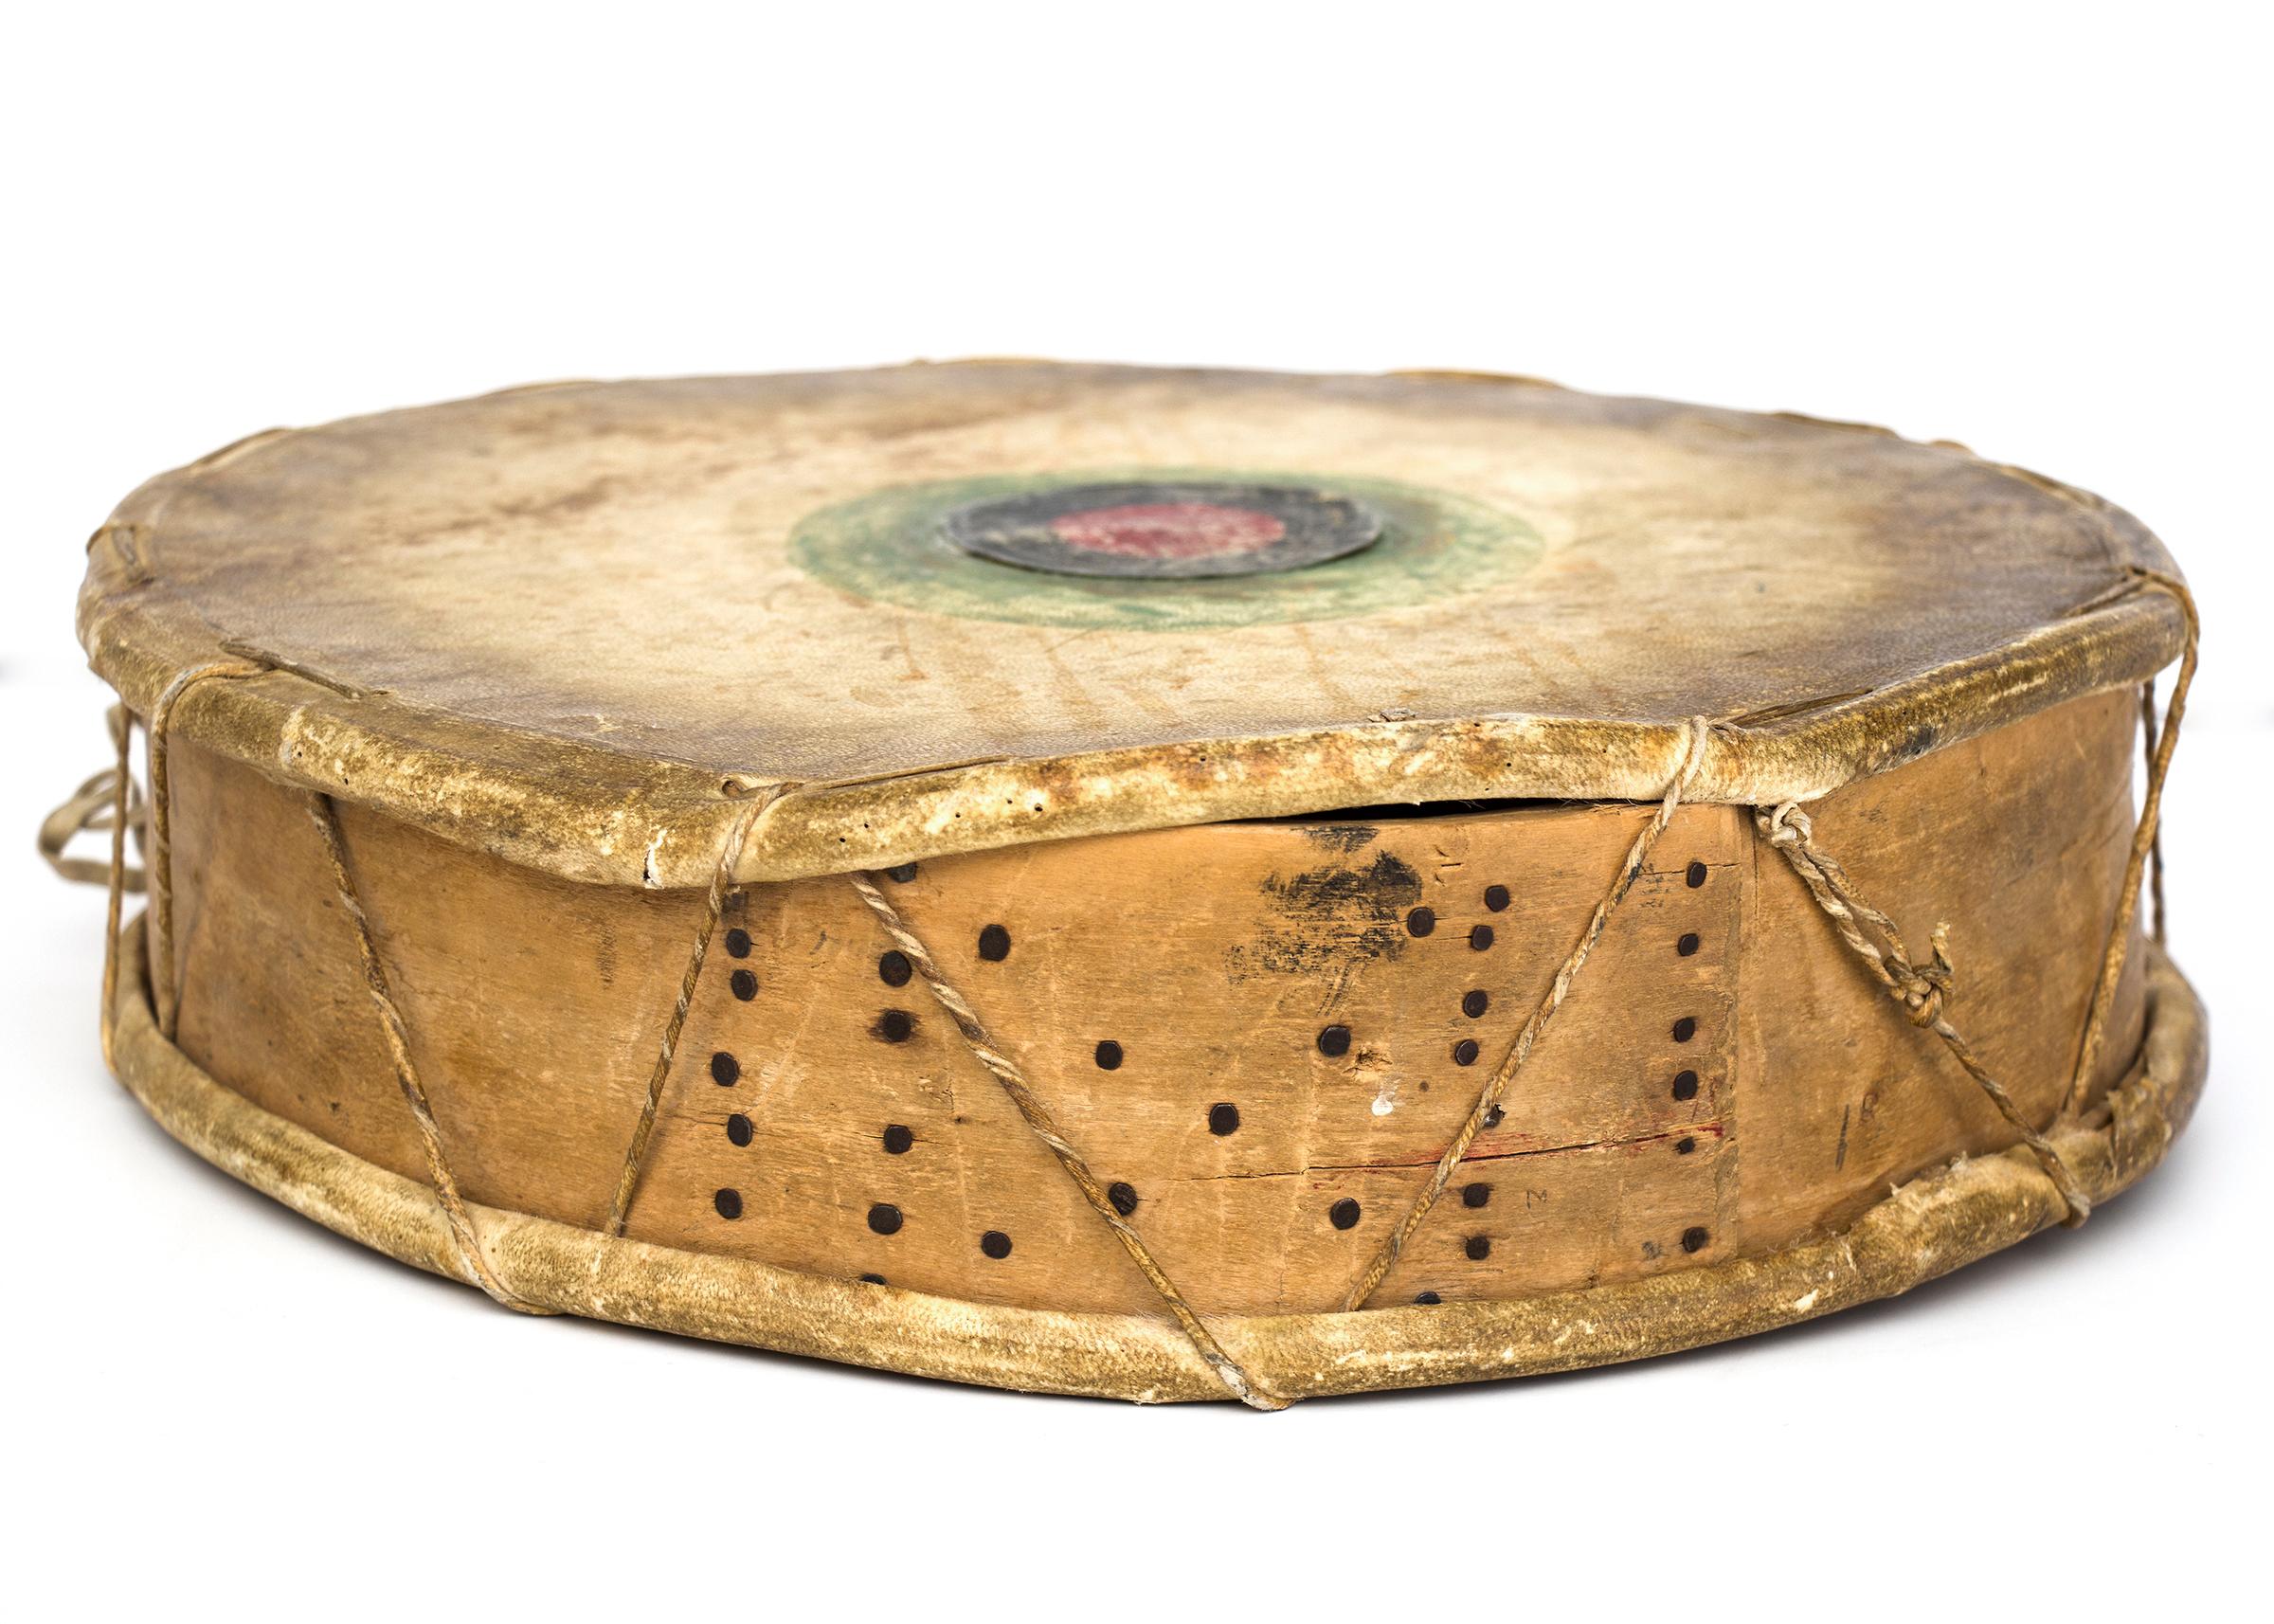 Hand-Painted Antique Native American Drum & Beater, Sioux 'Plains Indian', Early 20th Century